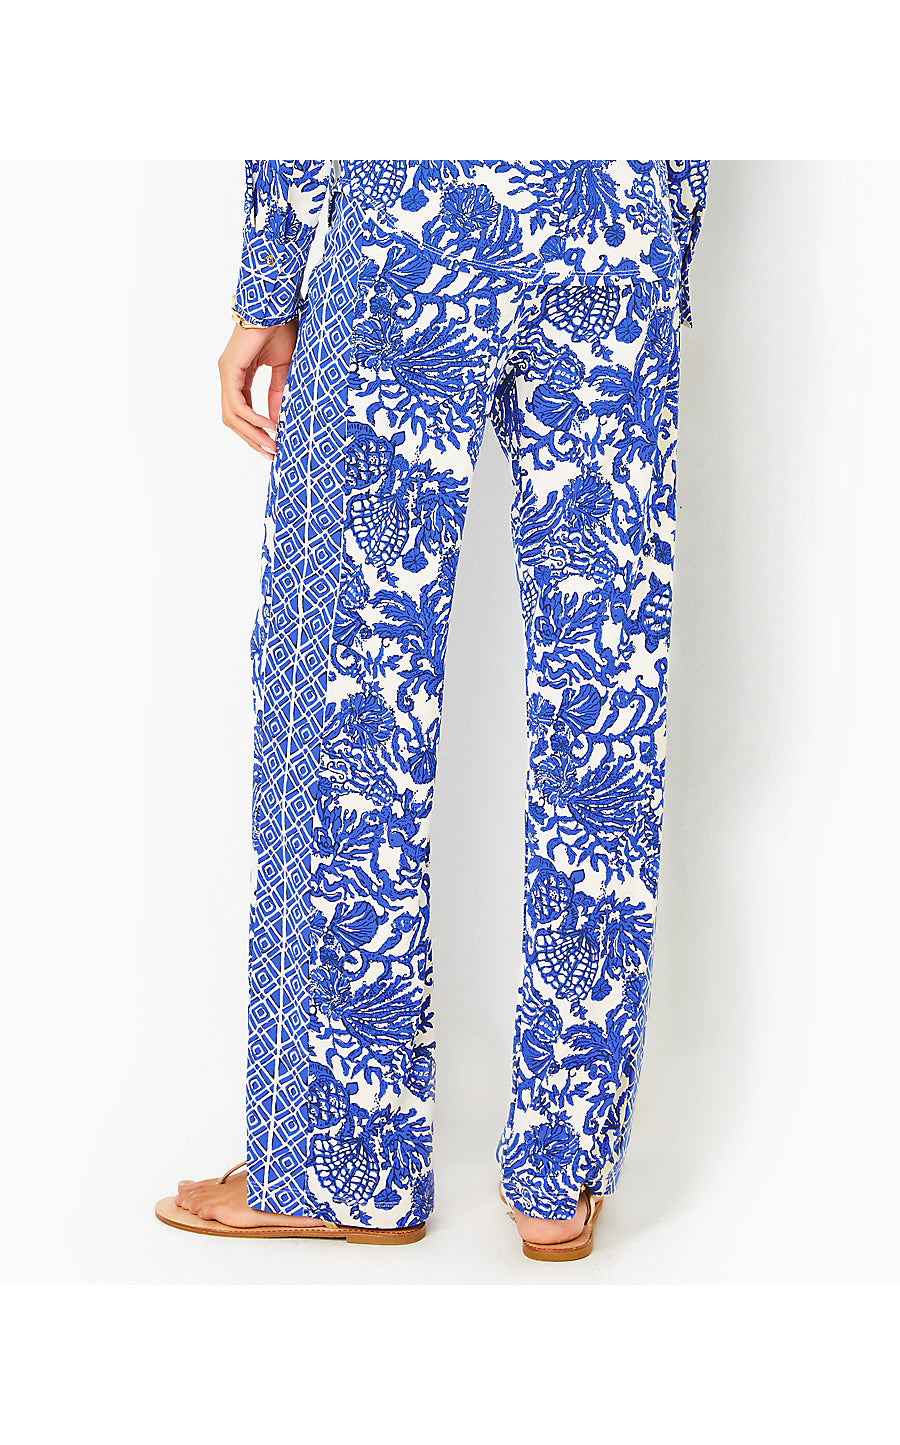 GRENADA KNIT PANT - RIDE WITH ME